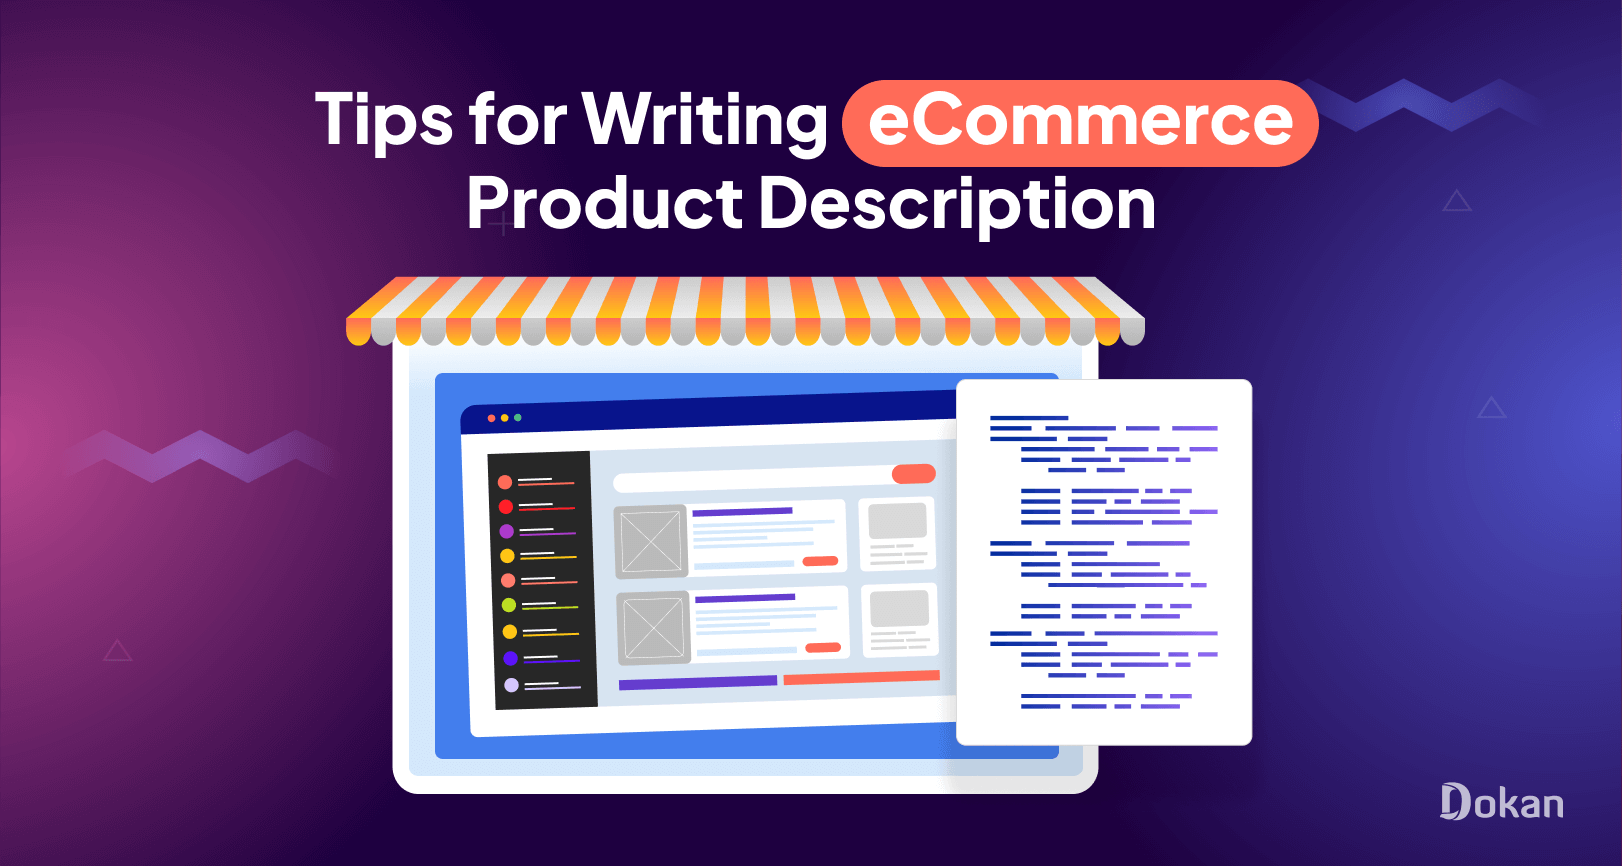 This is the feature image of the blog - How to Write eCommerce Product Descriptions